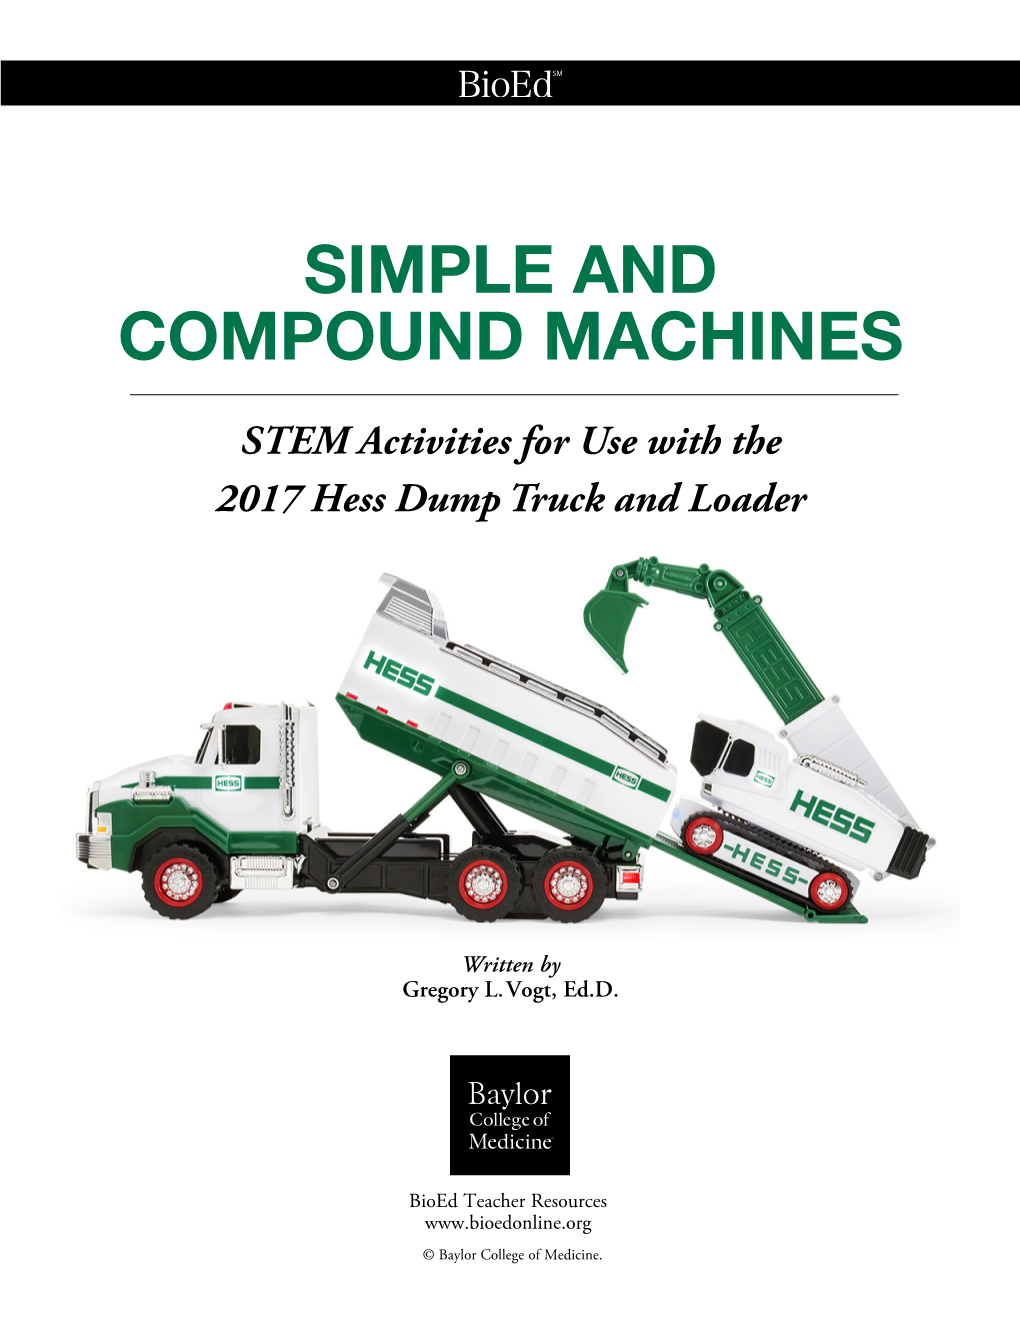 STEM Activities for Use with the 2017 Hess Dump Truck and Loader